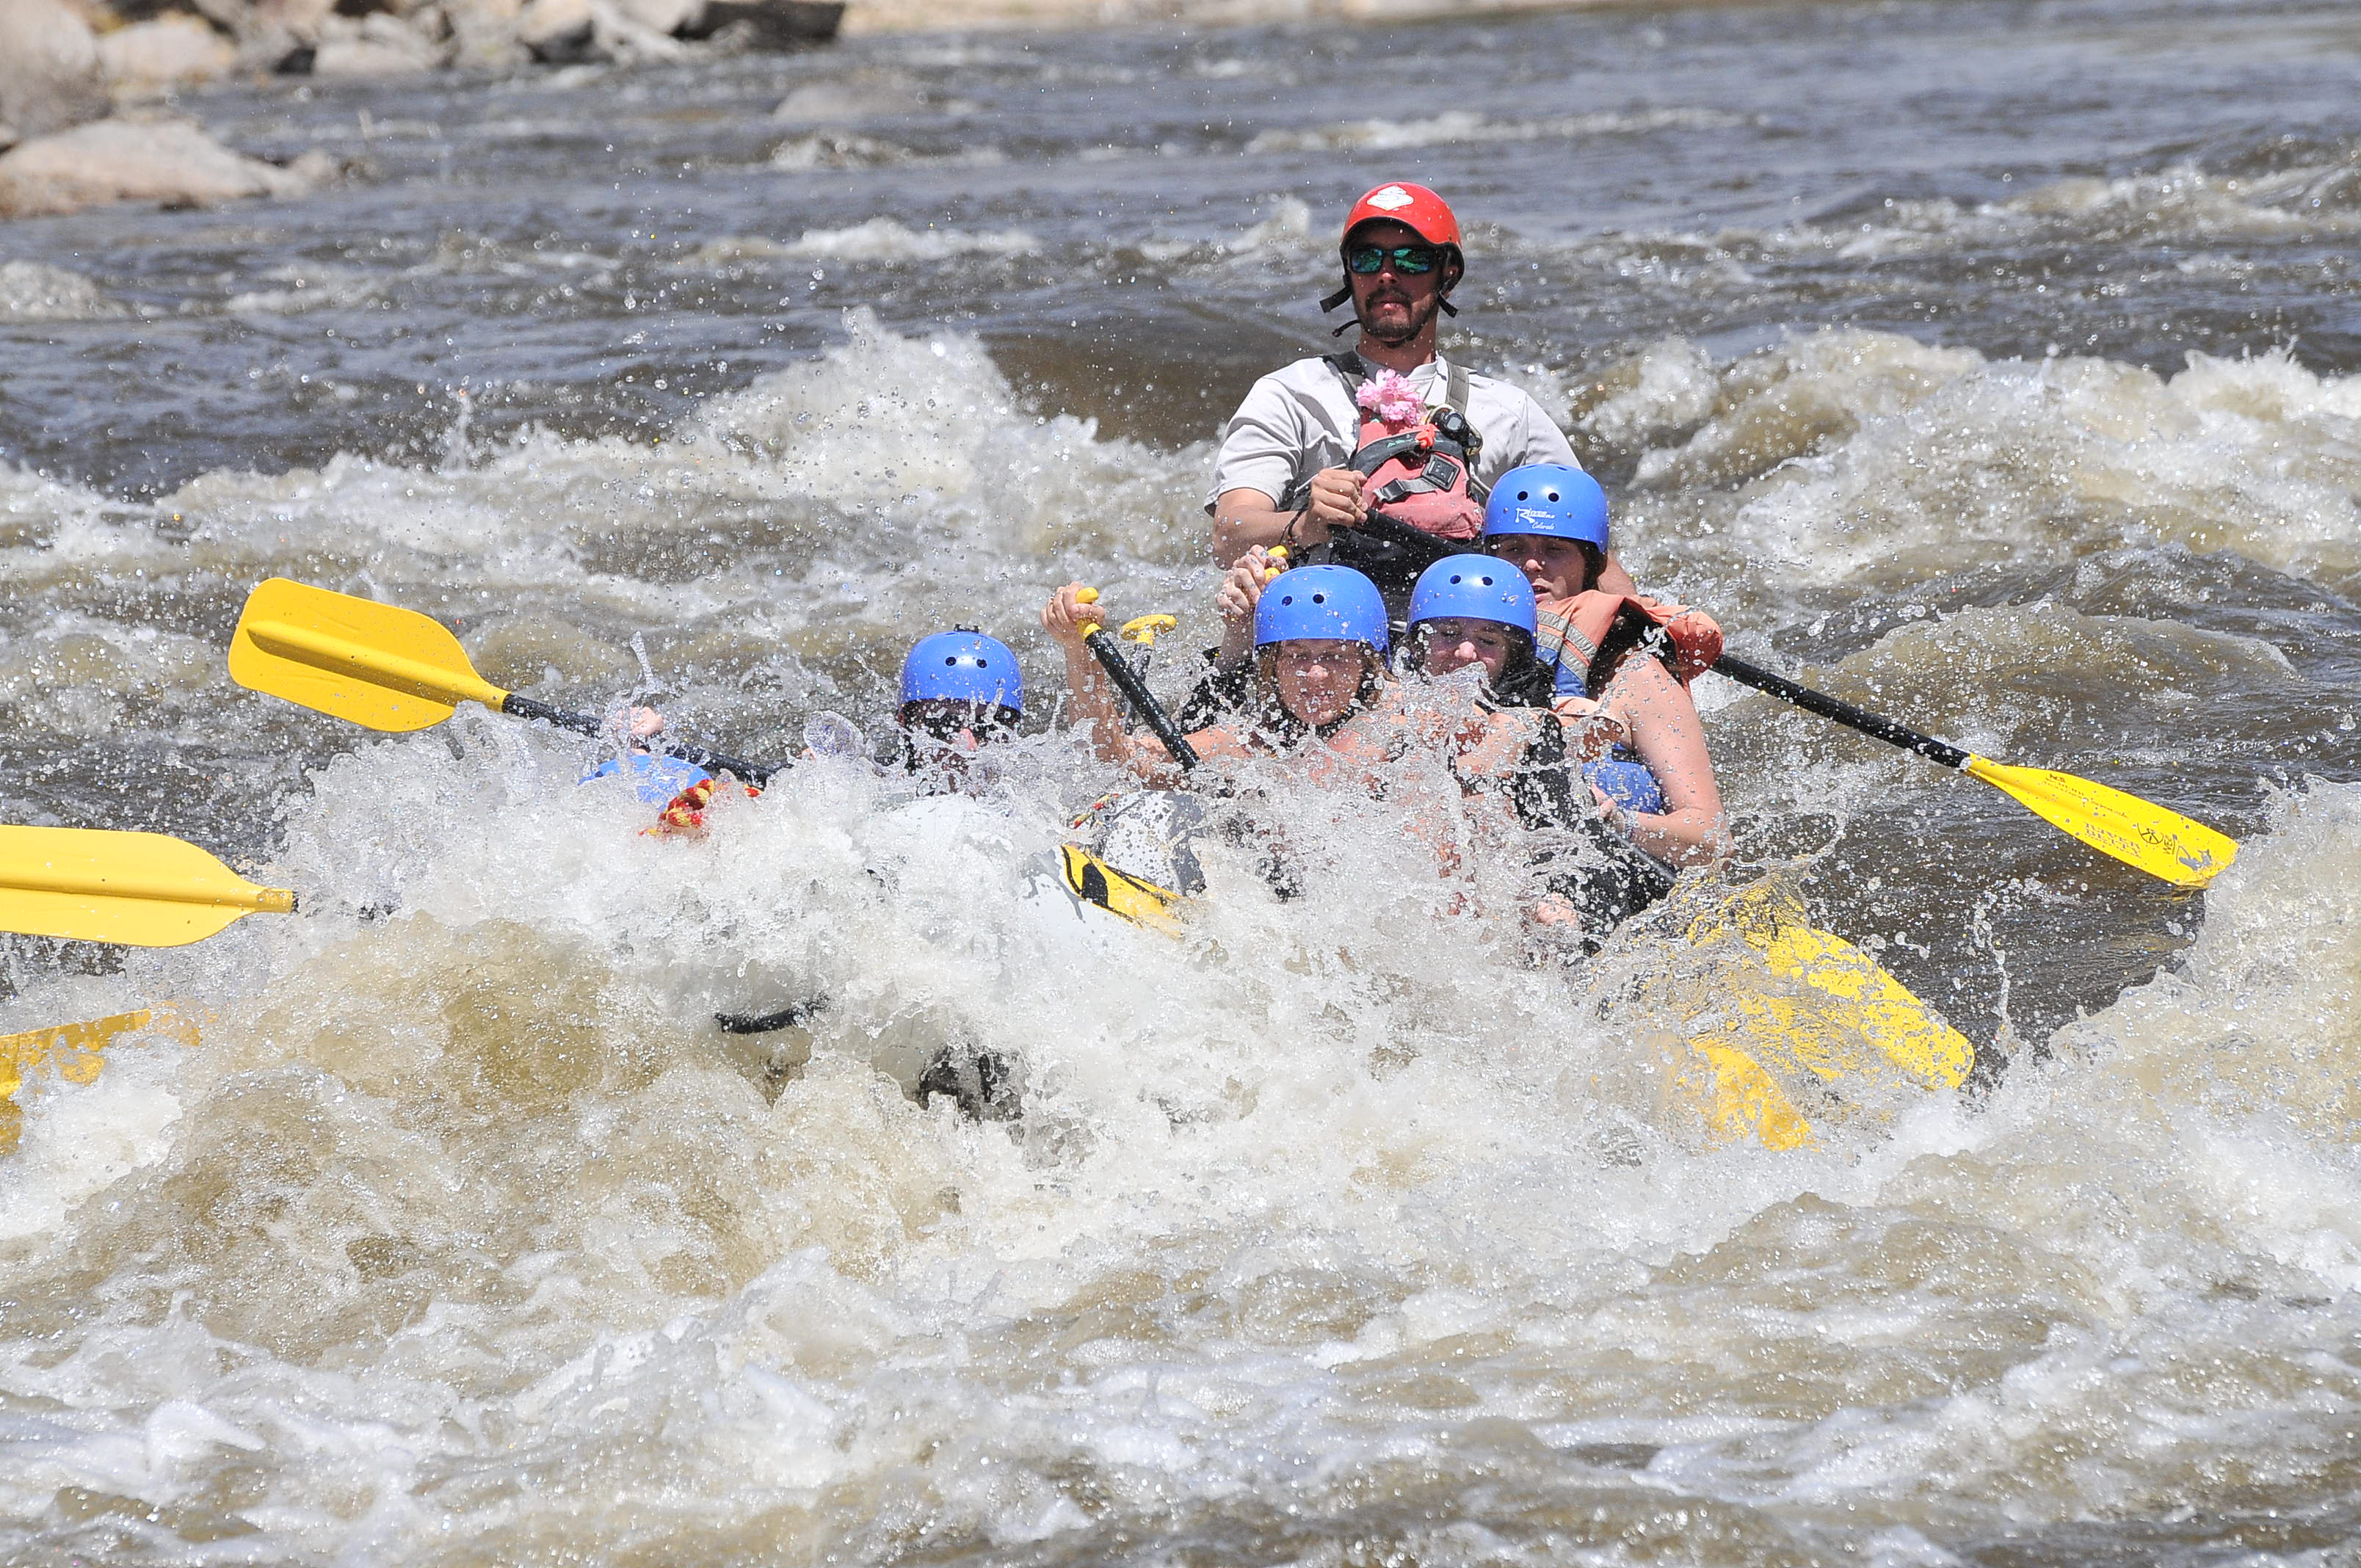 Whitewater rafting on the Arkansas River is open through Labor Day.